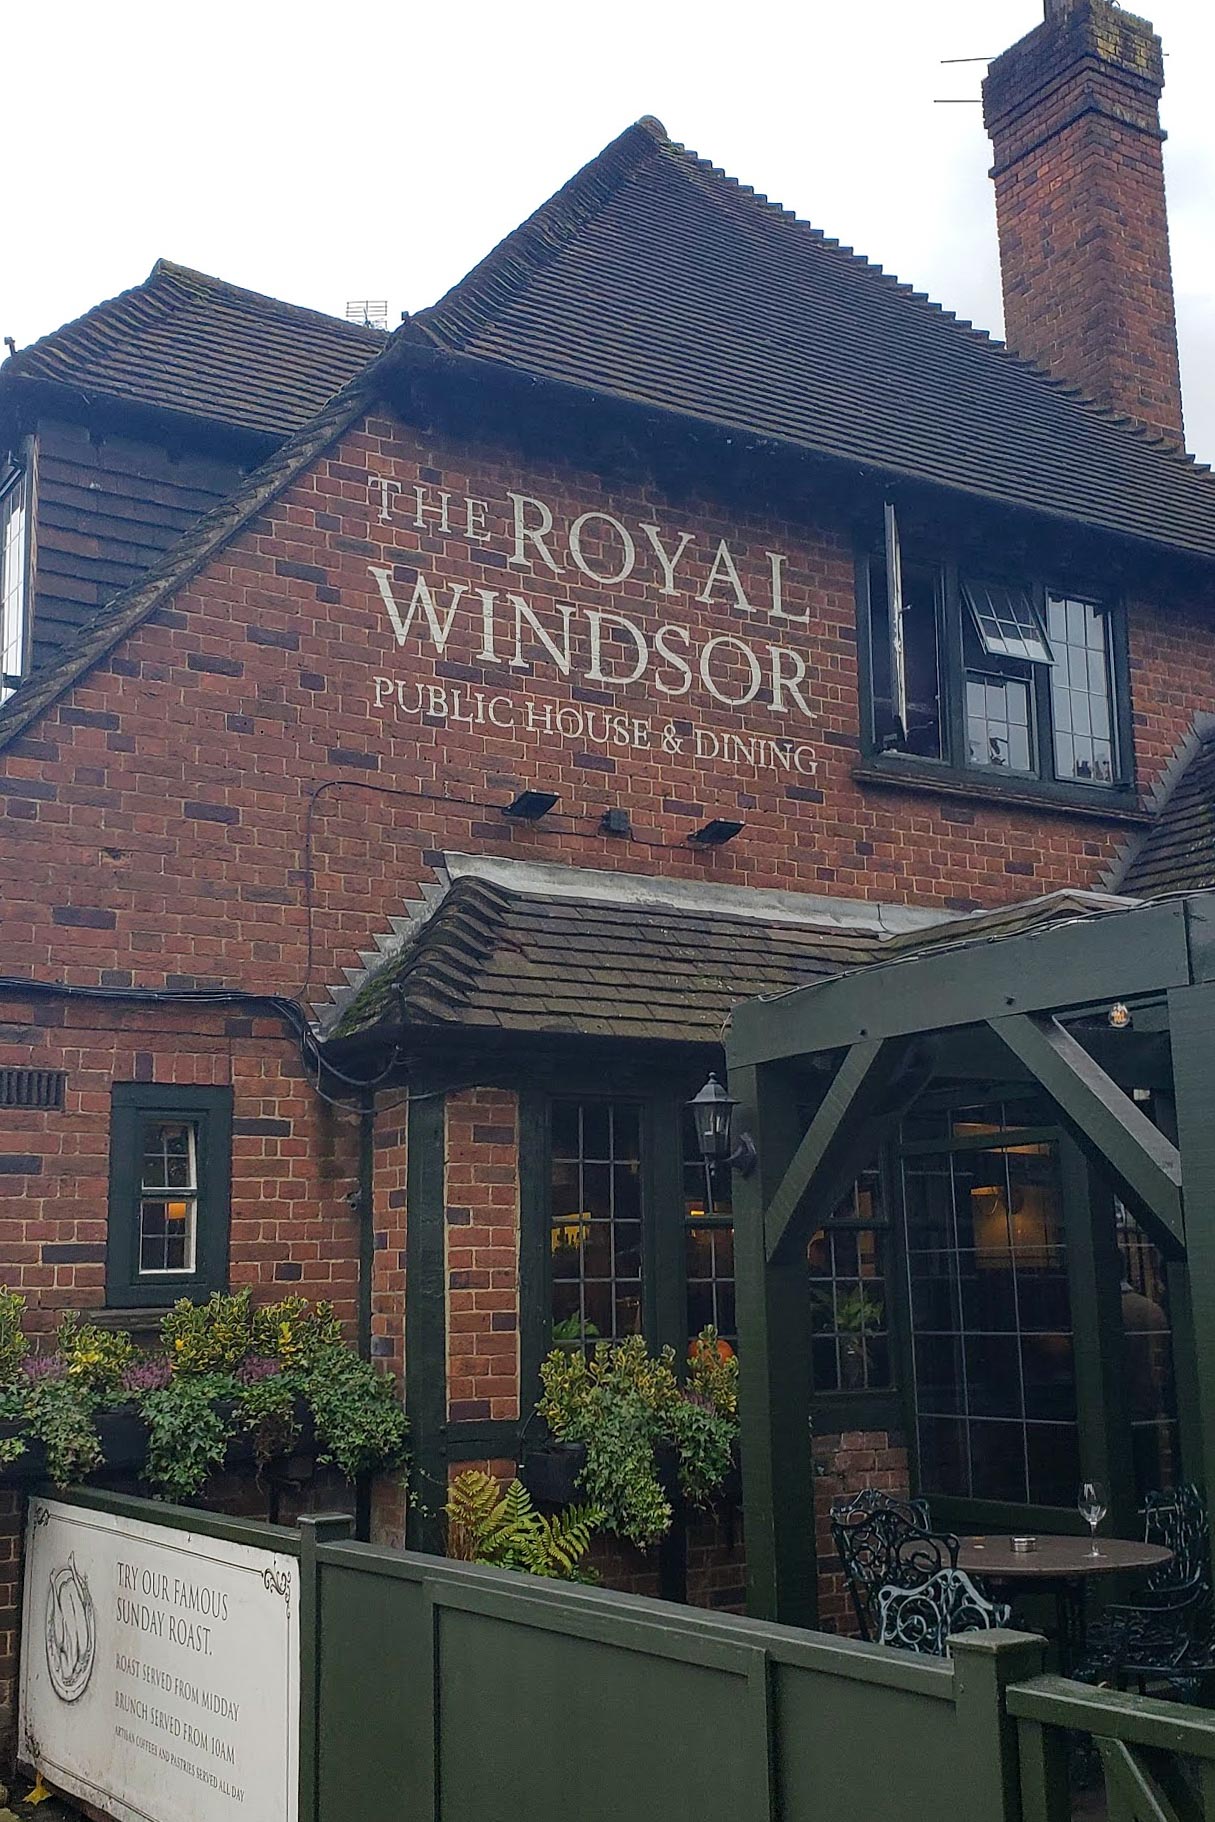 The royal windsor public house and dining